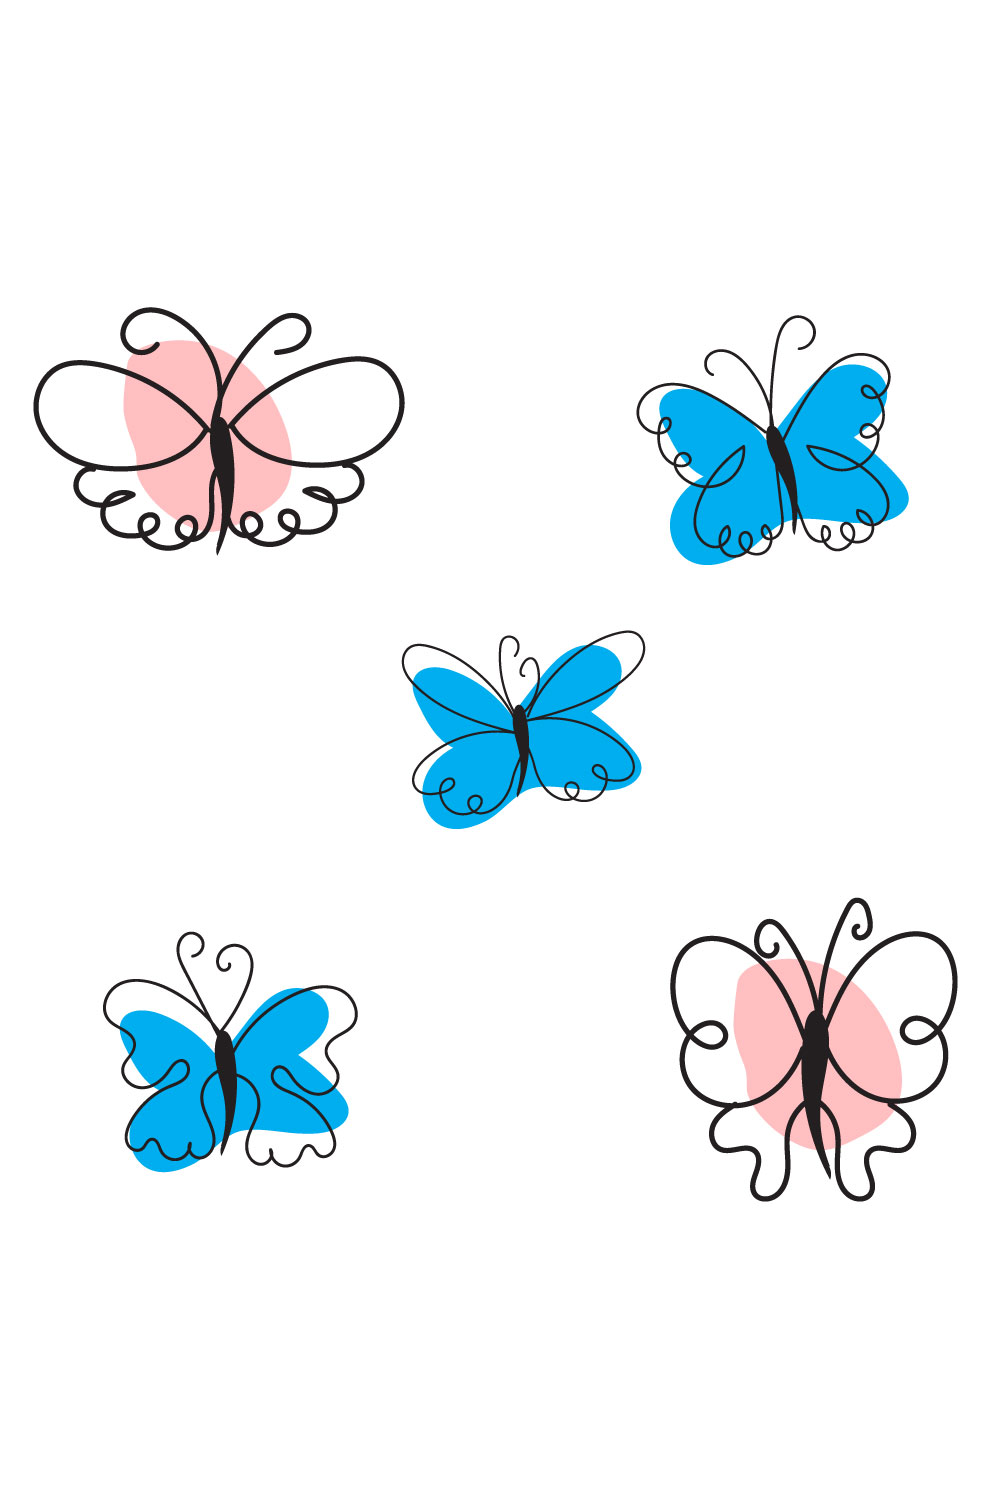 Group of four blue and pink butterflies.